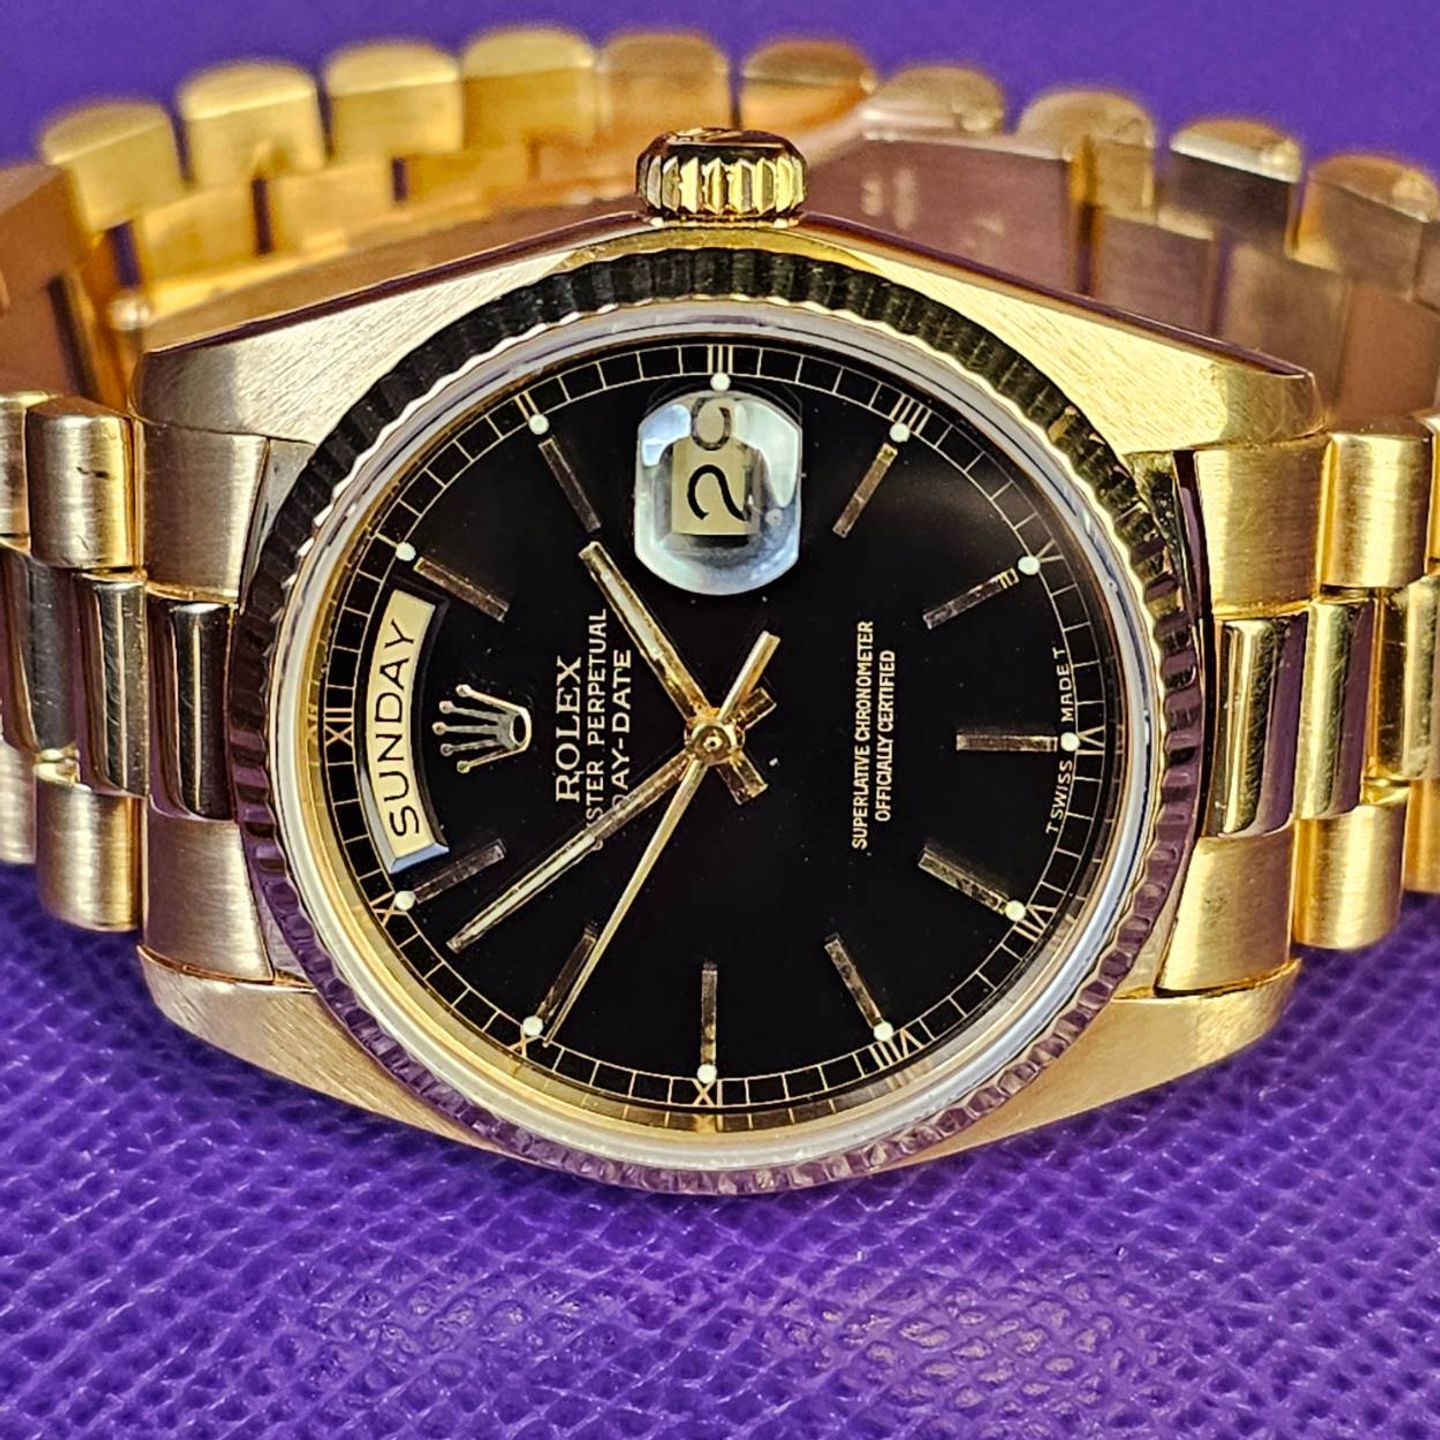 Rolex Day-Date 36 18038 (1983) - Black dial 36 mm Yellow Gold case (2/5)